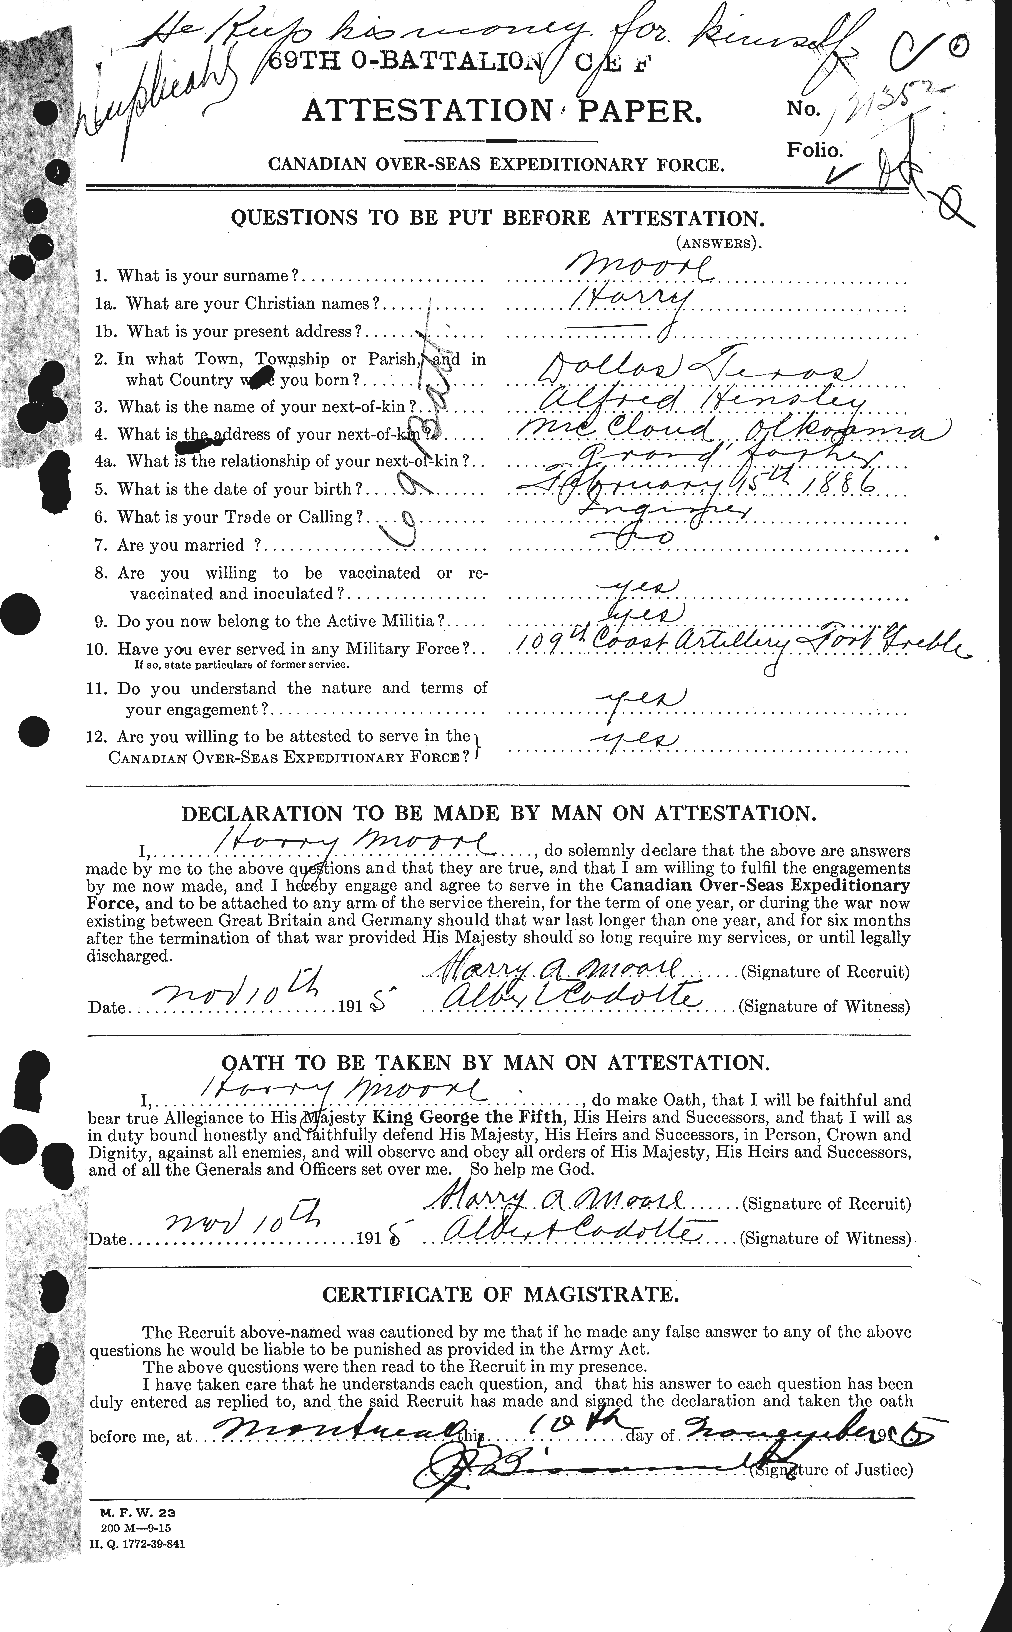 Personnel Records of the First World War - CEF 502078a